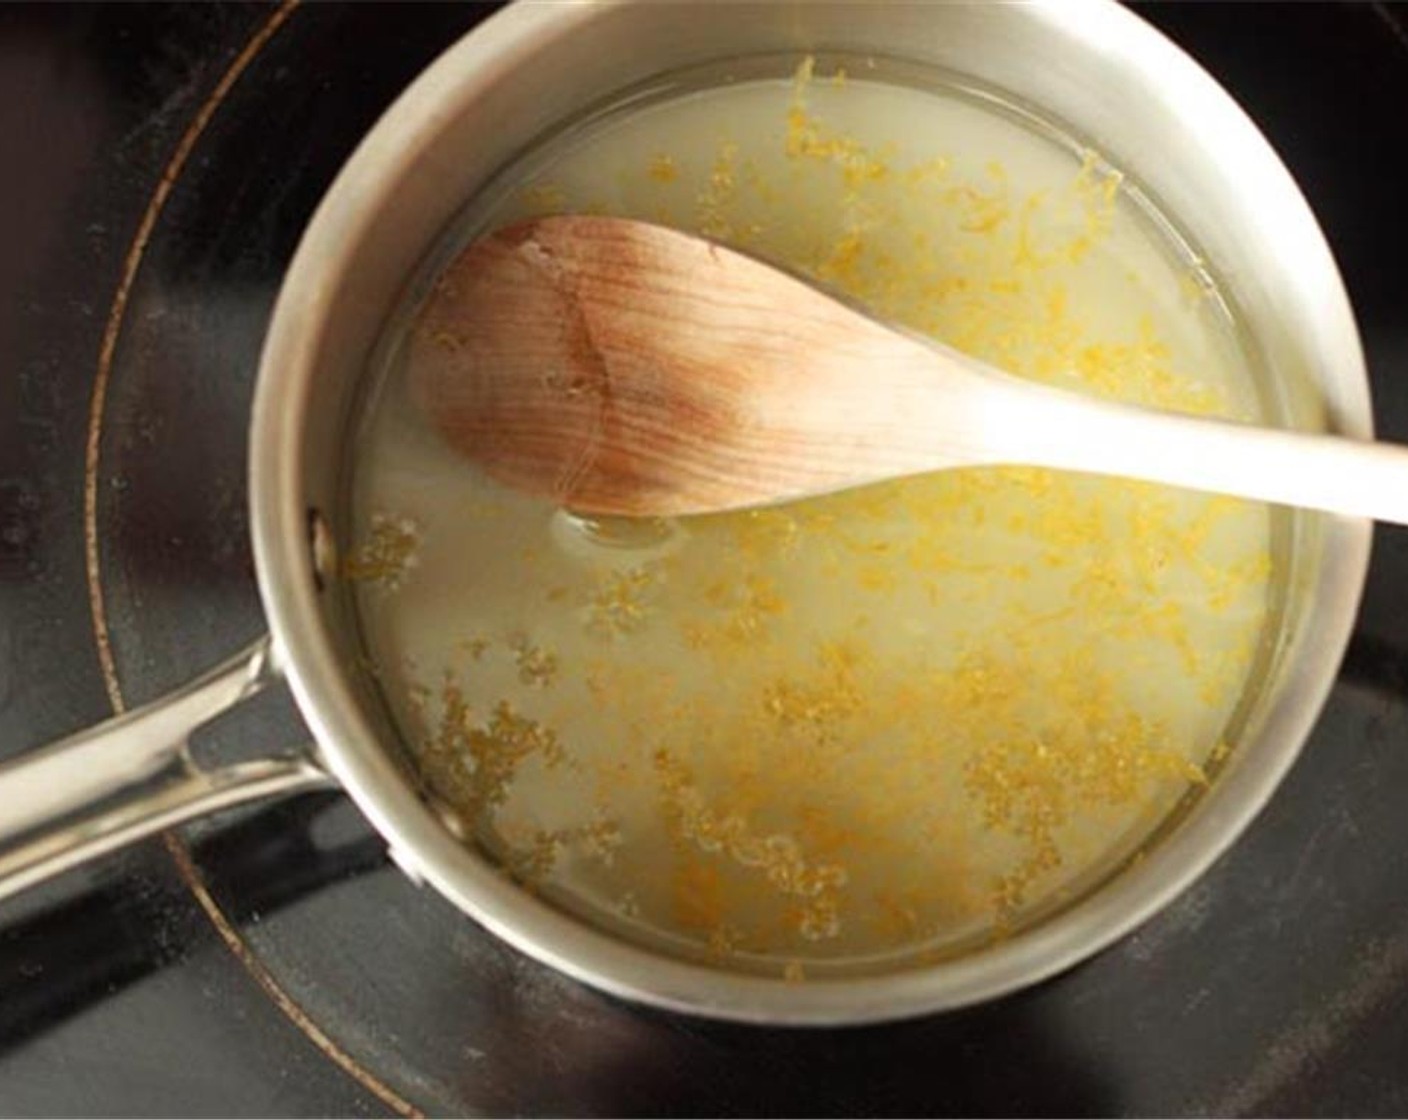 step 2 Combine Granulated Sugar (3/4 cup), Water (1 cup), and lemon zest in a small pot to make simple syrup. Heat the pot over medium-high heat until mixture starts to simmer and stir until sugar dissolves.